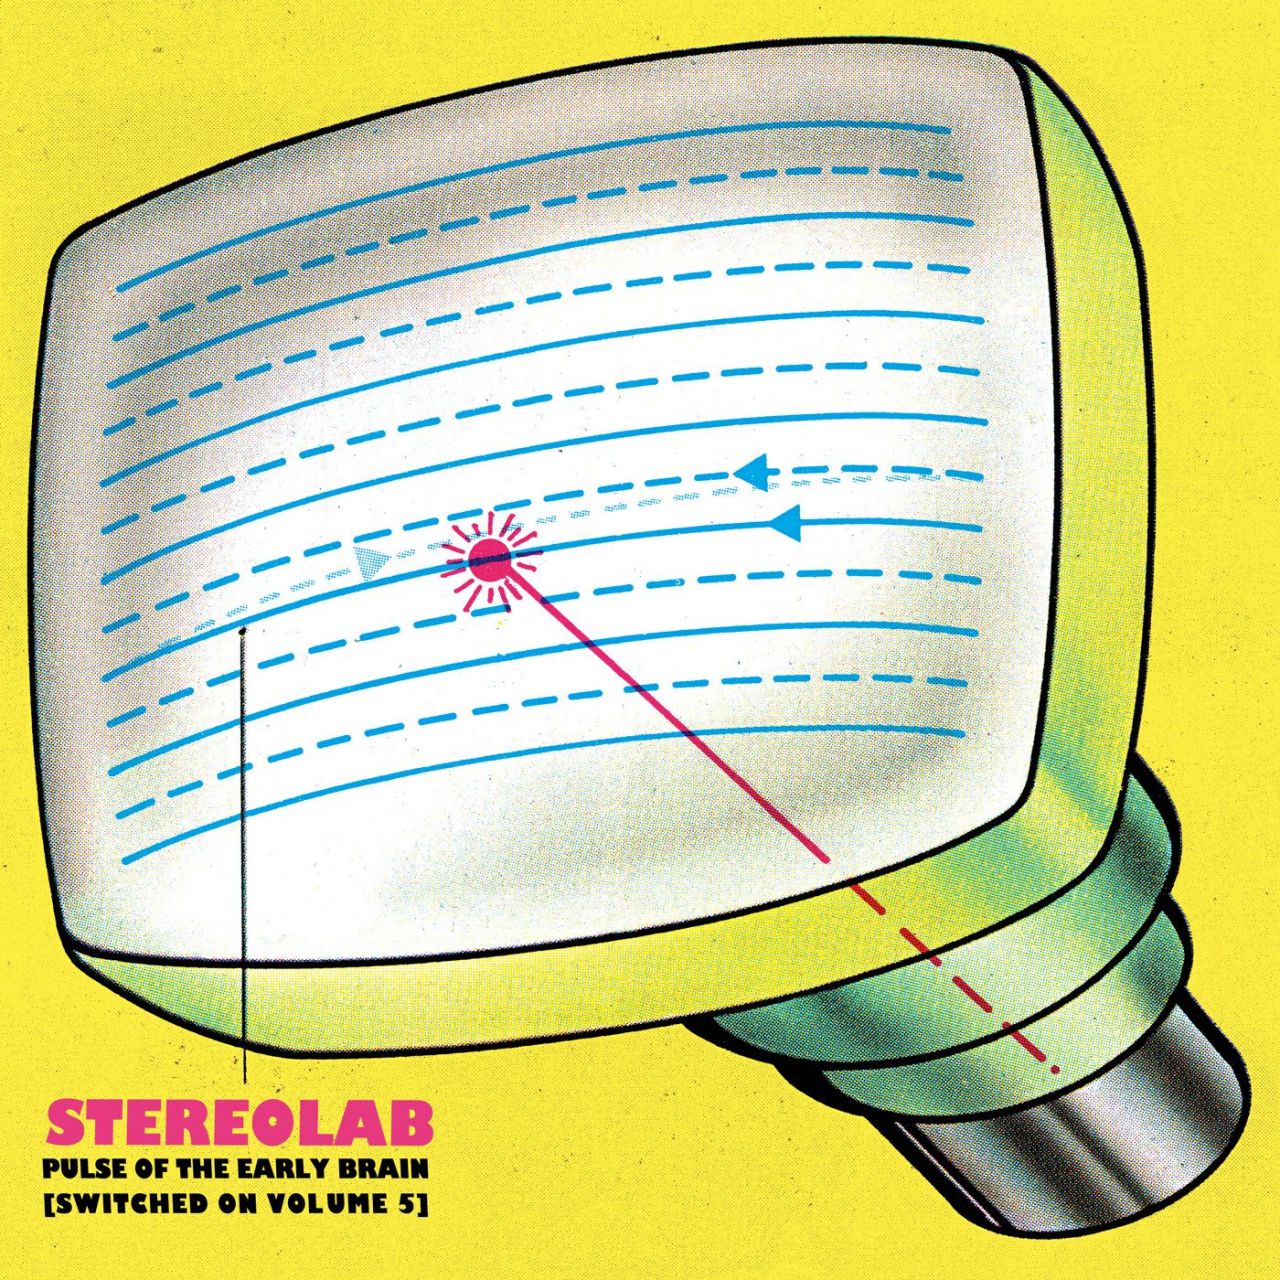 Stereolab - Pulse Of The Early Brain [Switched On Volume 5] - 2CD